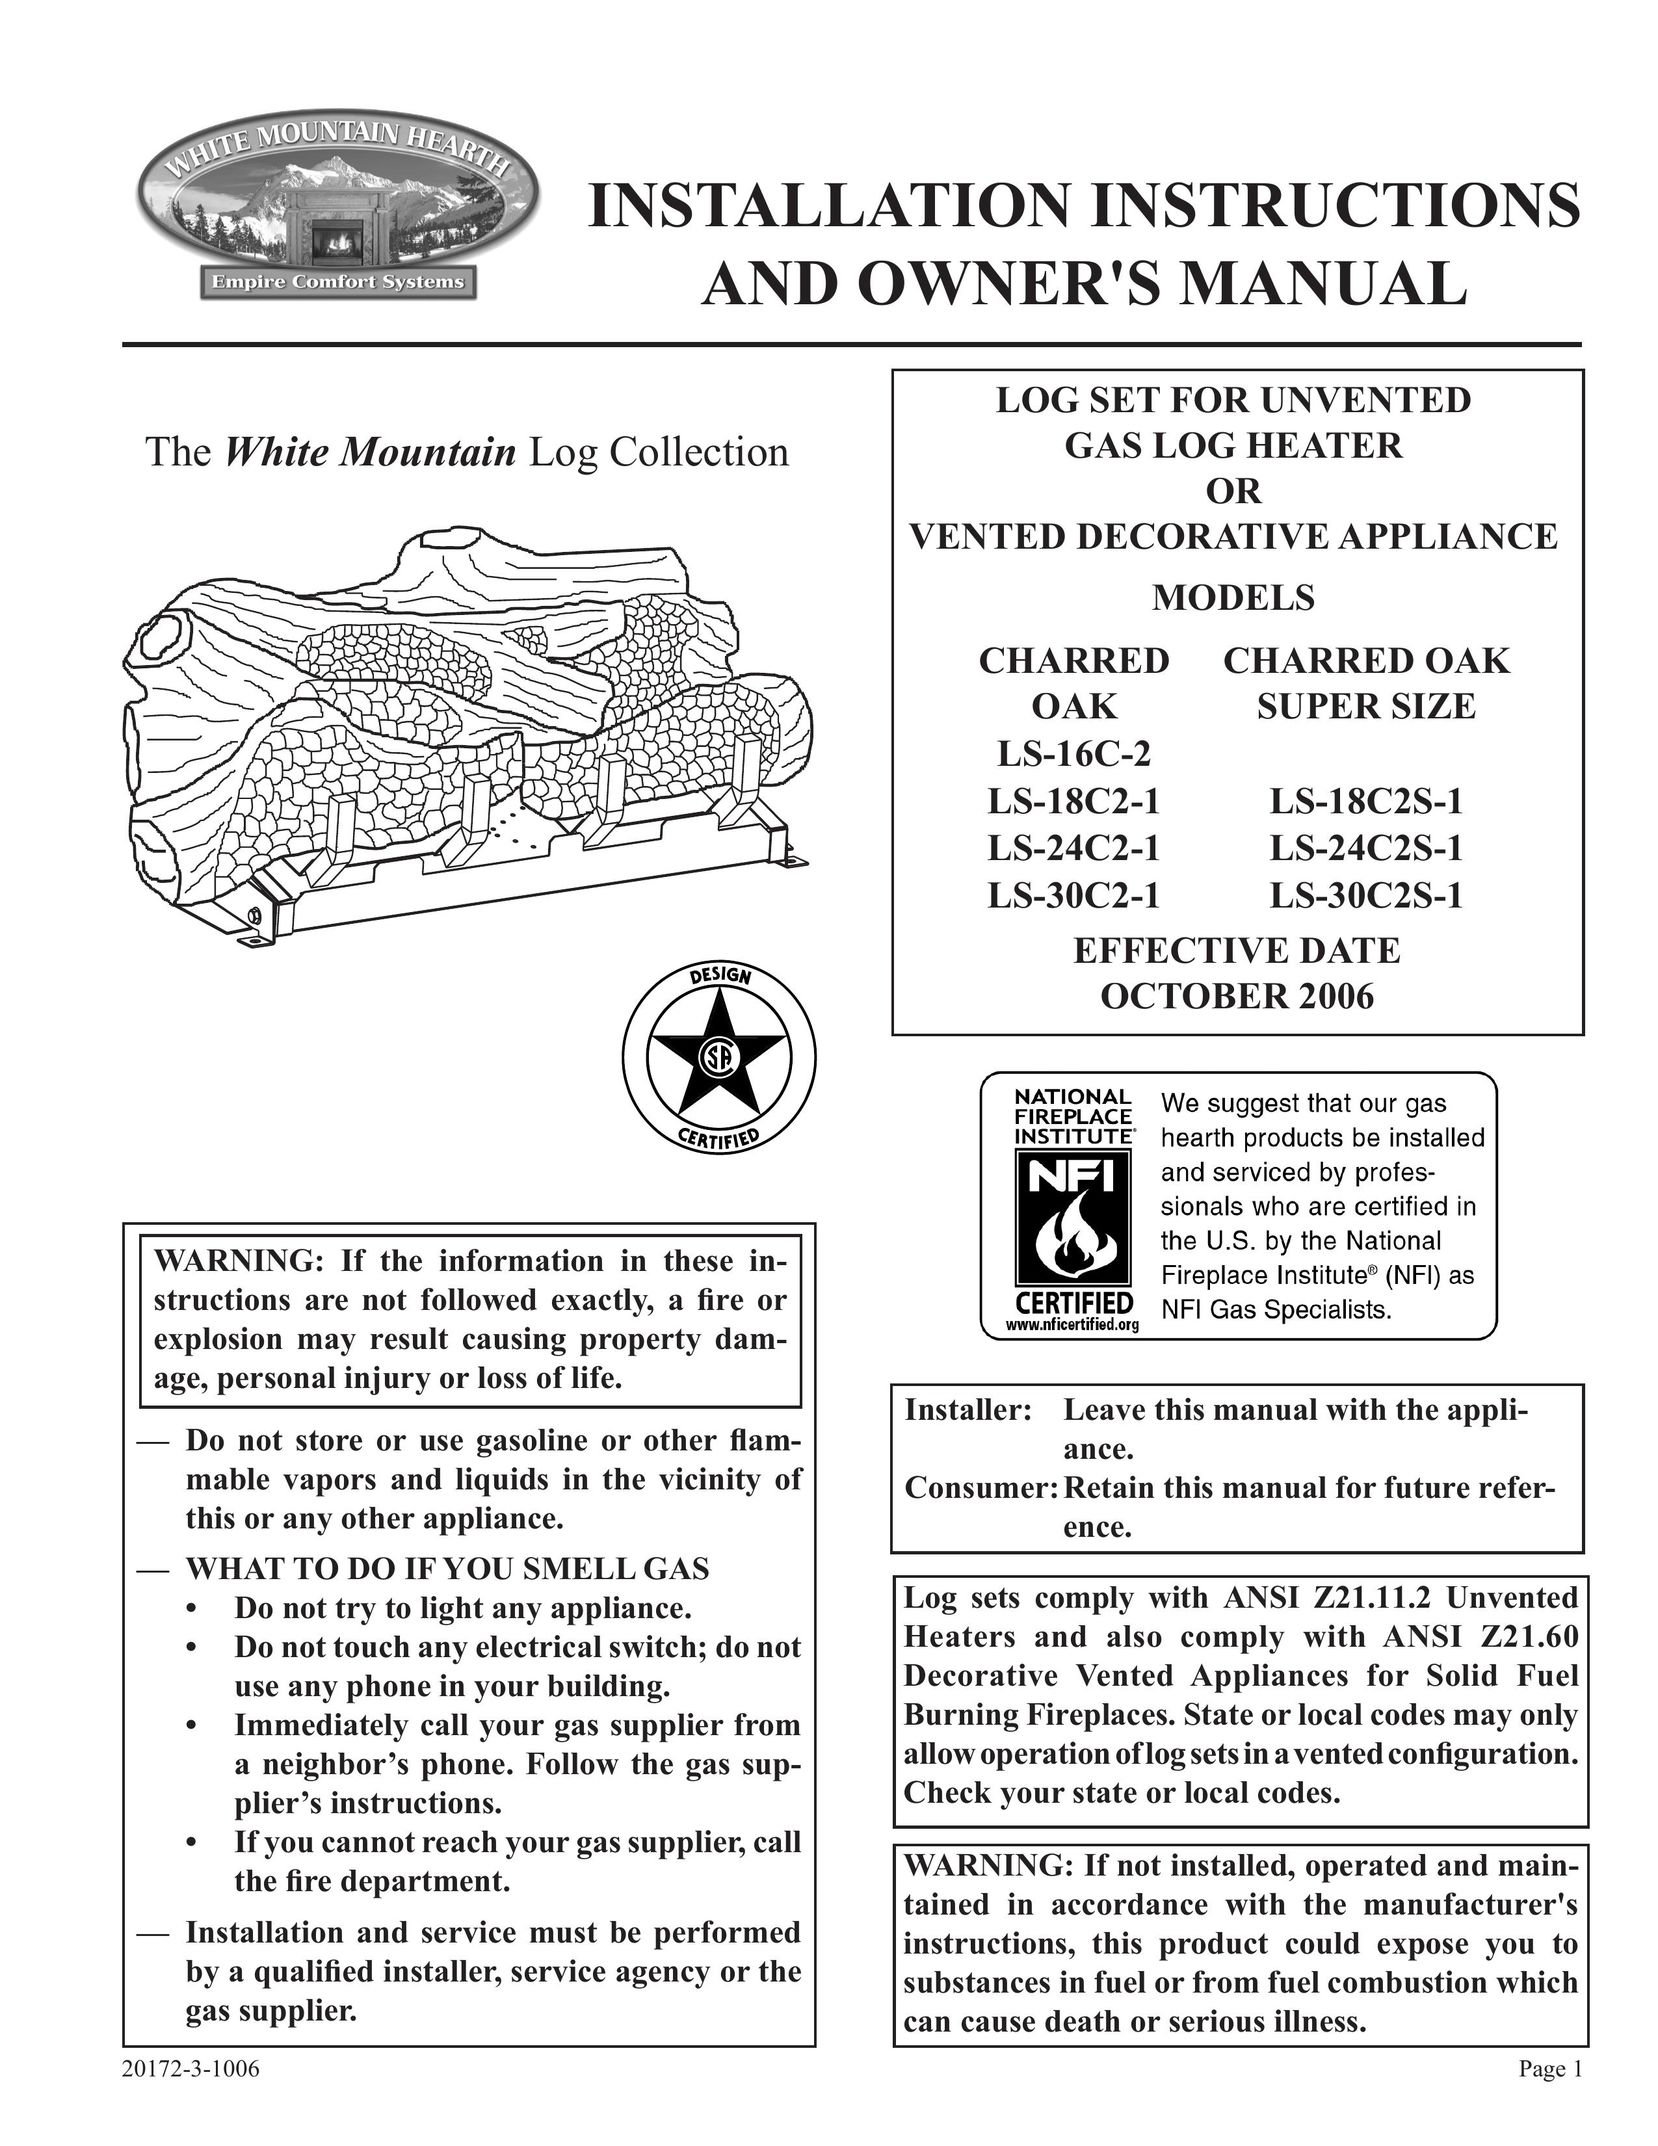 Empire Comfort Systems LS-24C2-1 Gas Heater User Manual